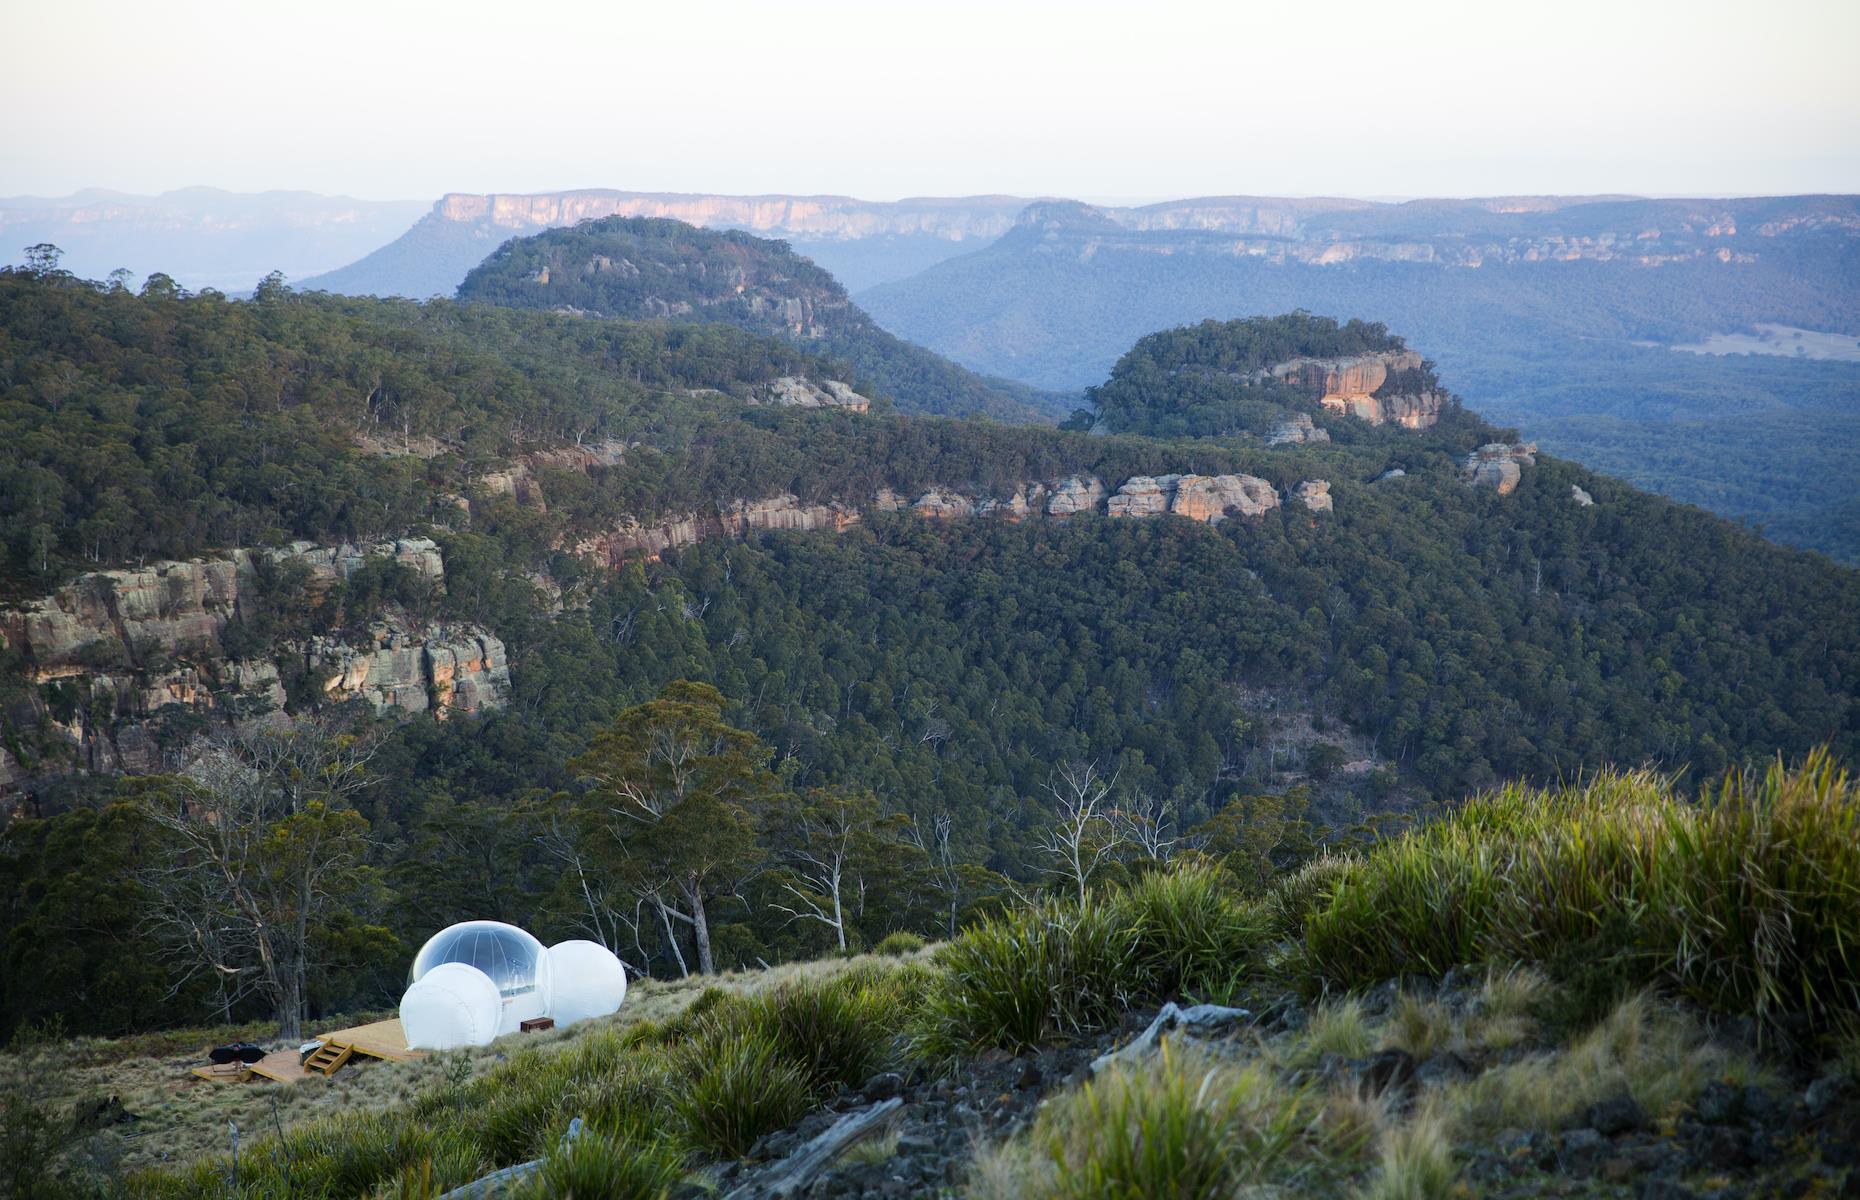 <p>Where exactly <a href="https://bubbletentaustralia.com/">Bubble Tent Australia</a> is located is kept top secret until bookings are made. All we know is that the three bubbles are somewhere between Mudgee and Lithgow overlooking Capertee Valley, hidden away from each other and the world. With firepits, floating day beds and wood-fired tubs, every detail has been accounted for. By day, it’s all about bird spotting, but it's at night when the tents come into their own. Designed with stargazing in mind, guests are given telescopes and iPads with astronomy apps. </p>